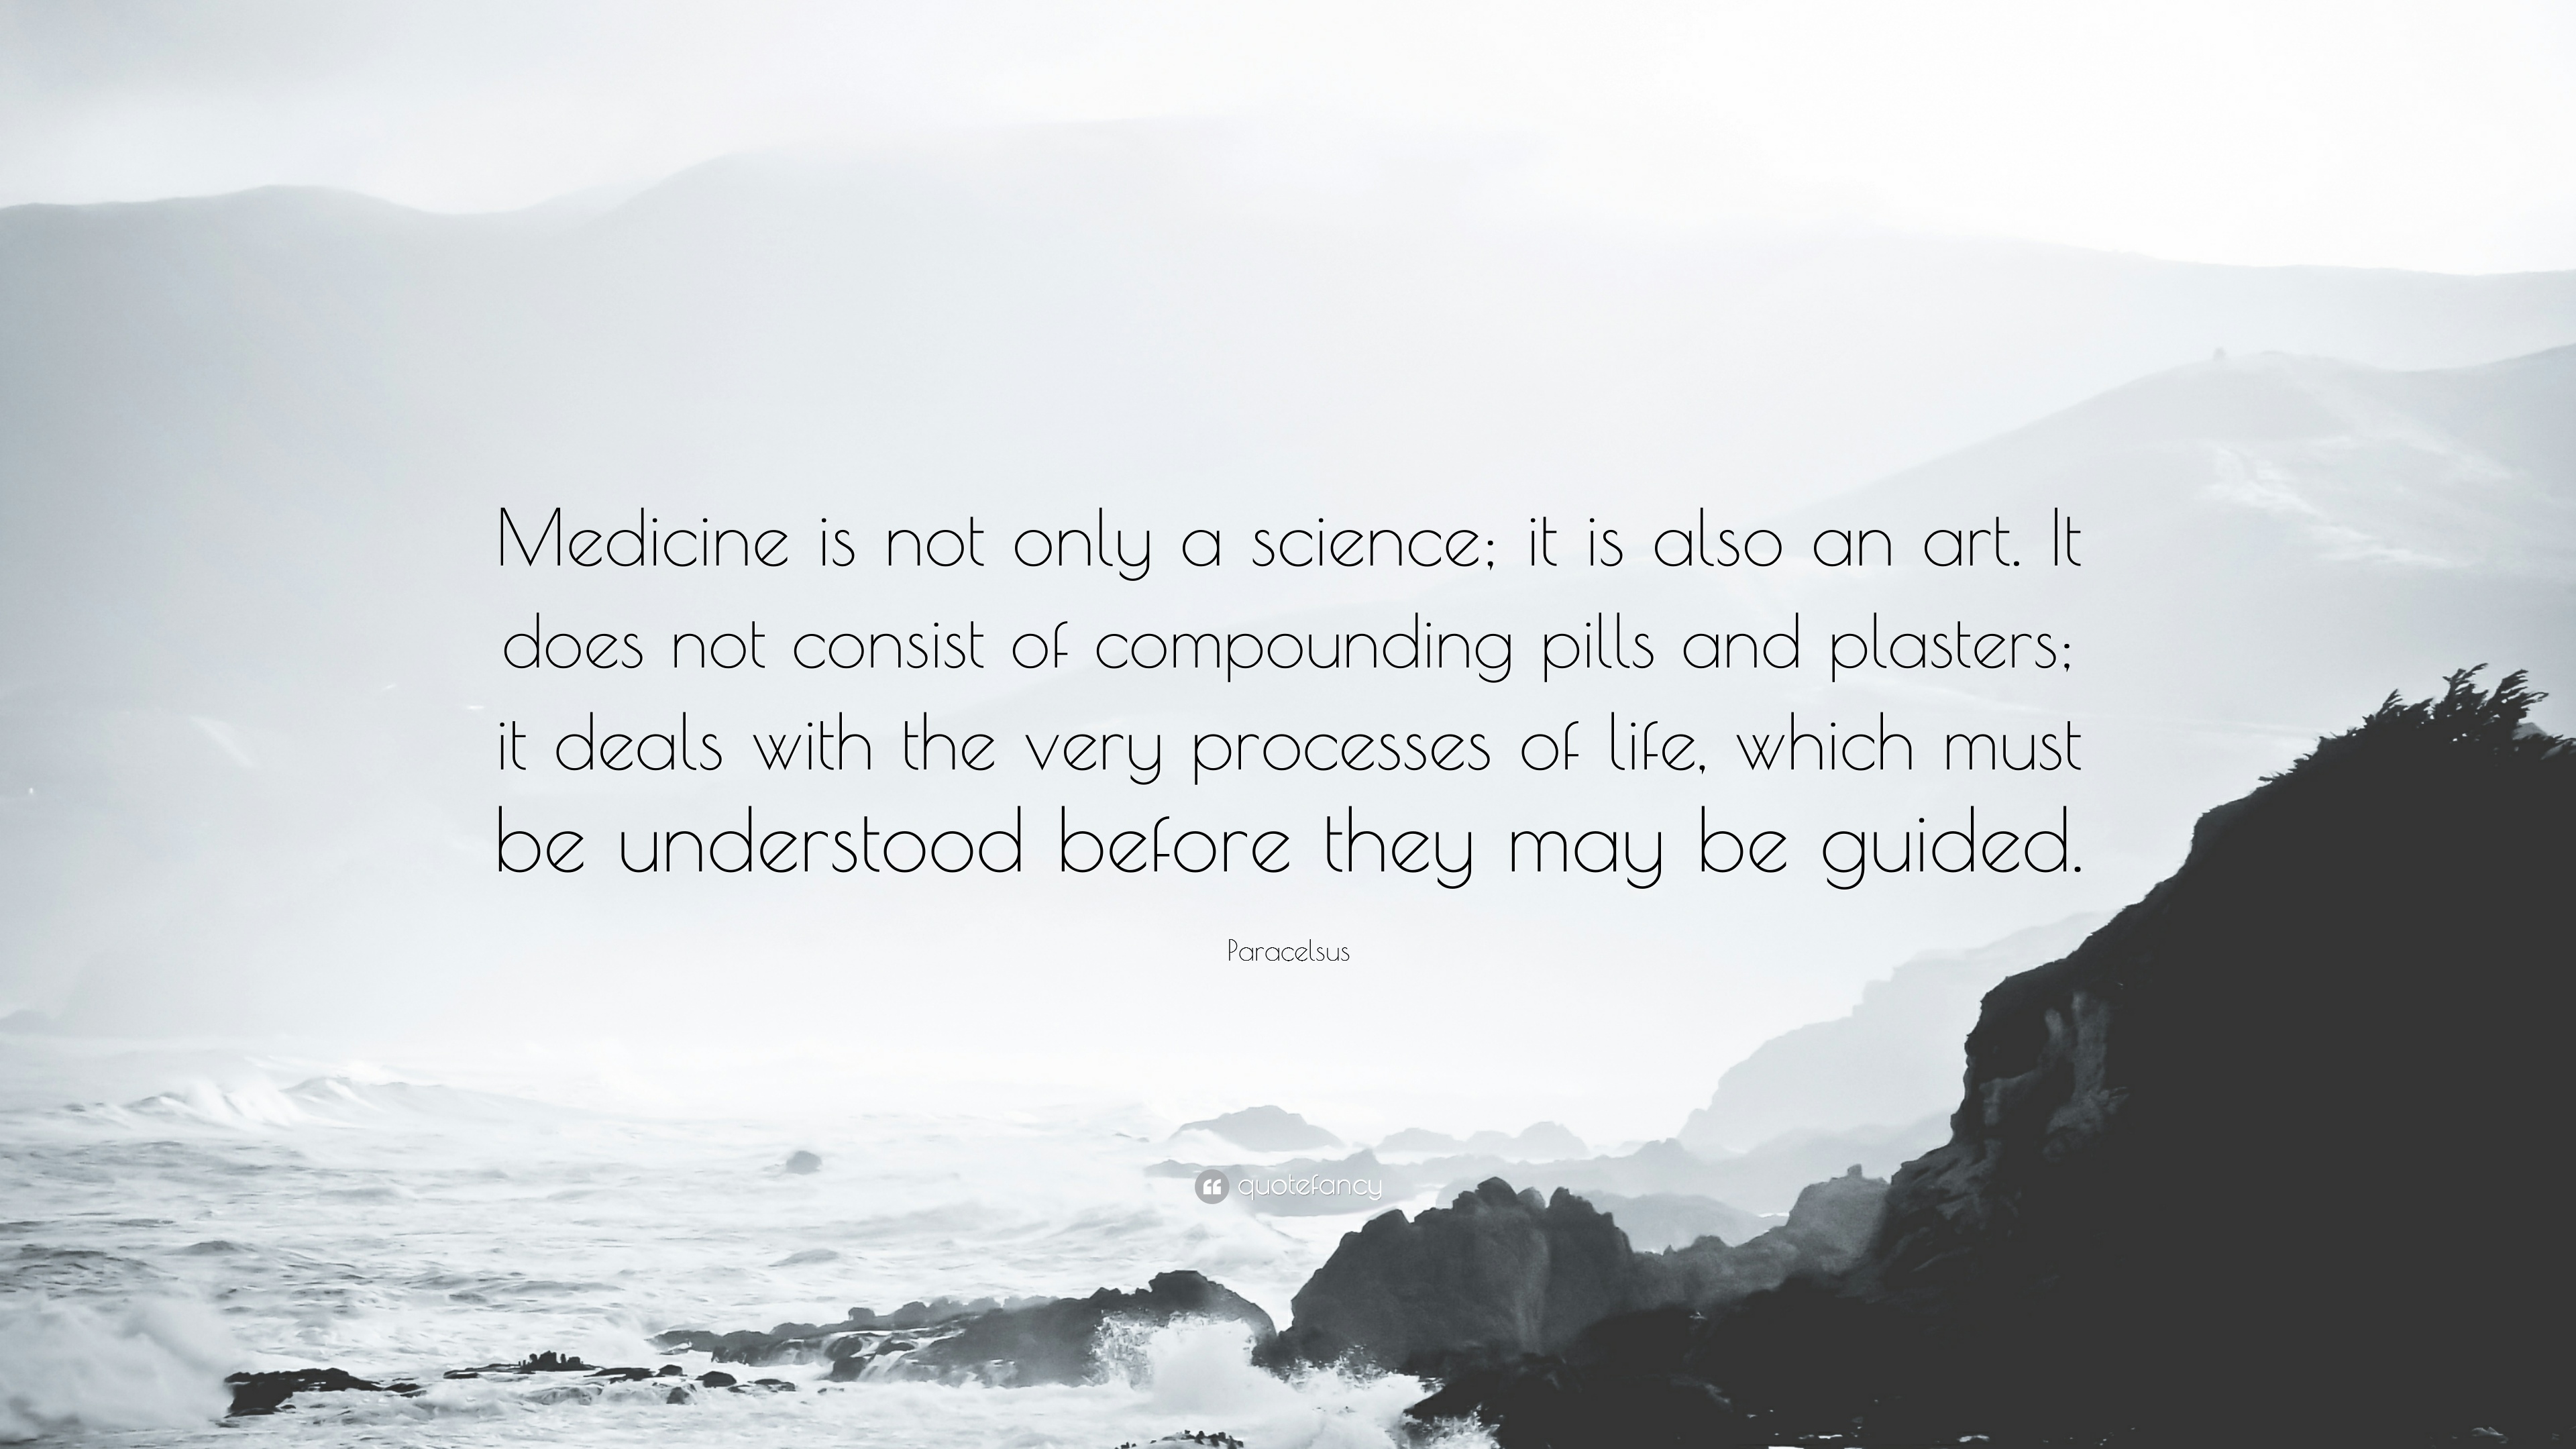 medicine is not only a science, it is also an art. it does not consist of compounding pills and plasters. it deals with the very processes of life, which must be understood before they may be guided